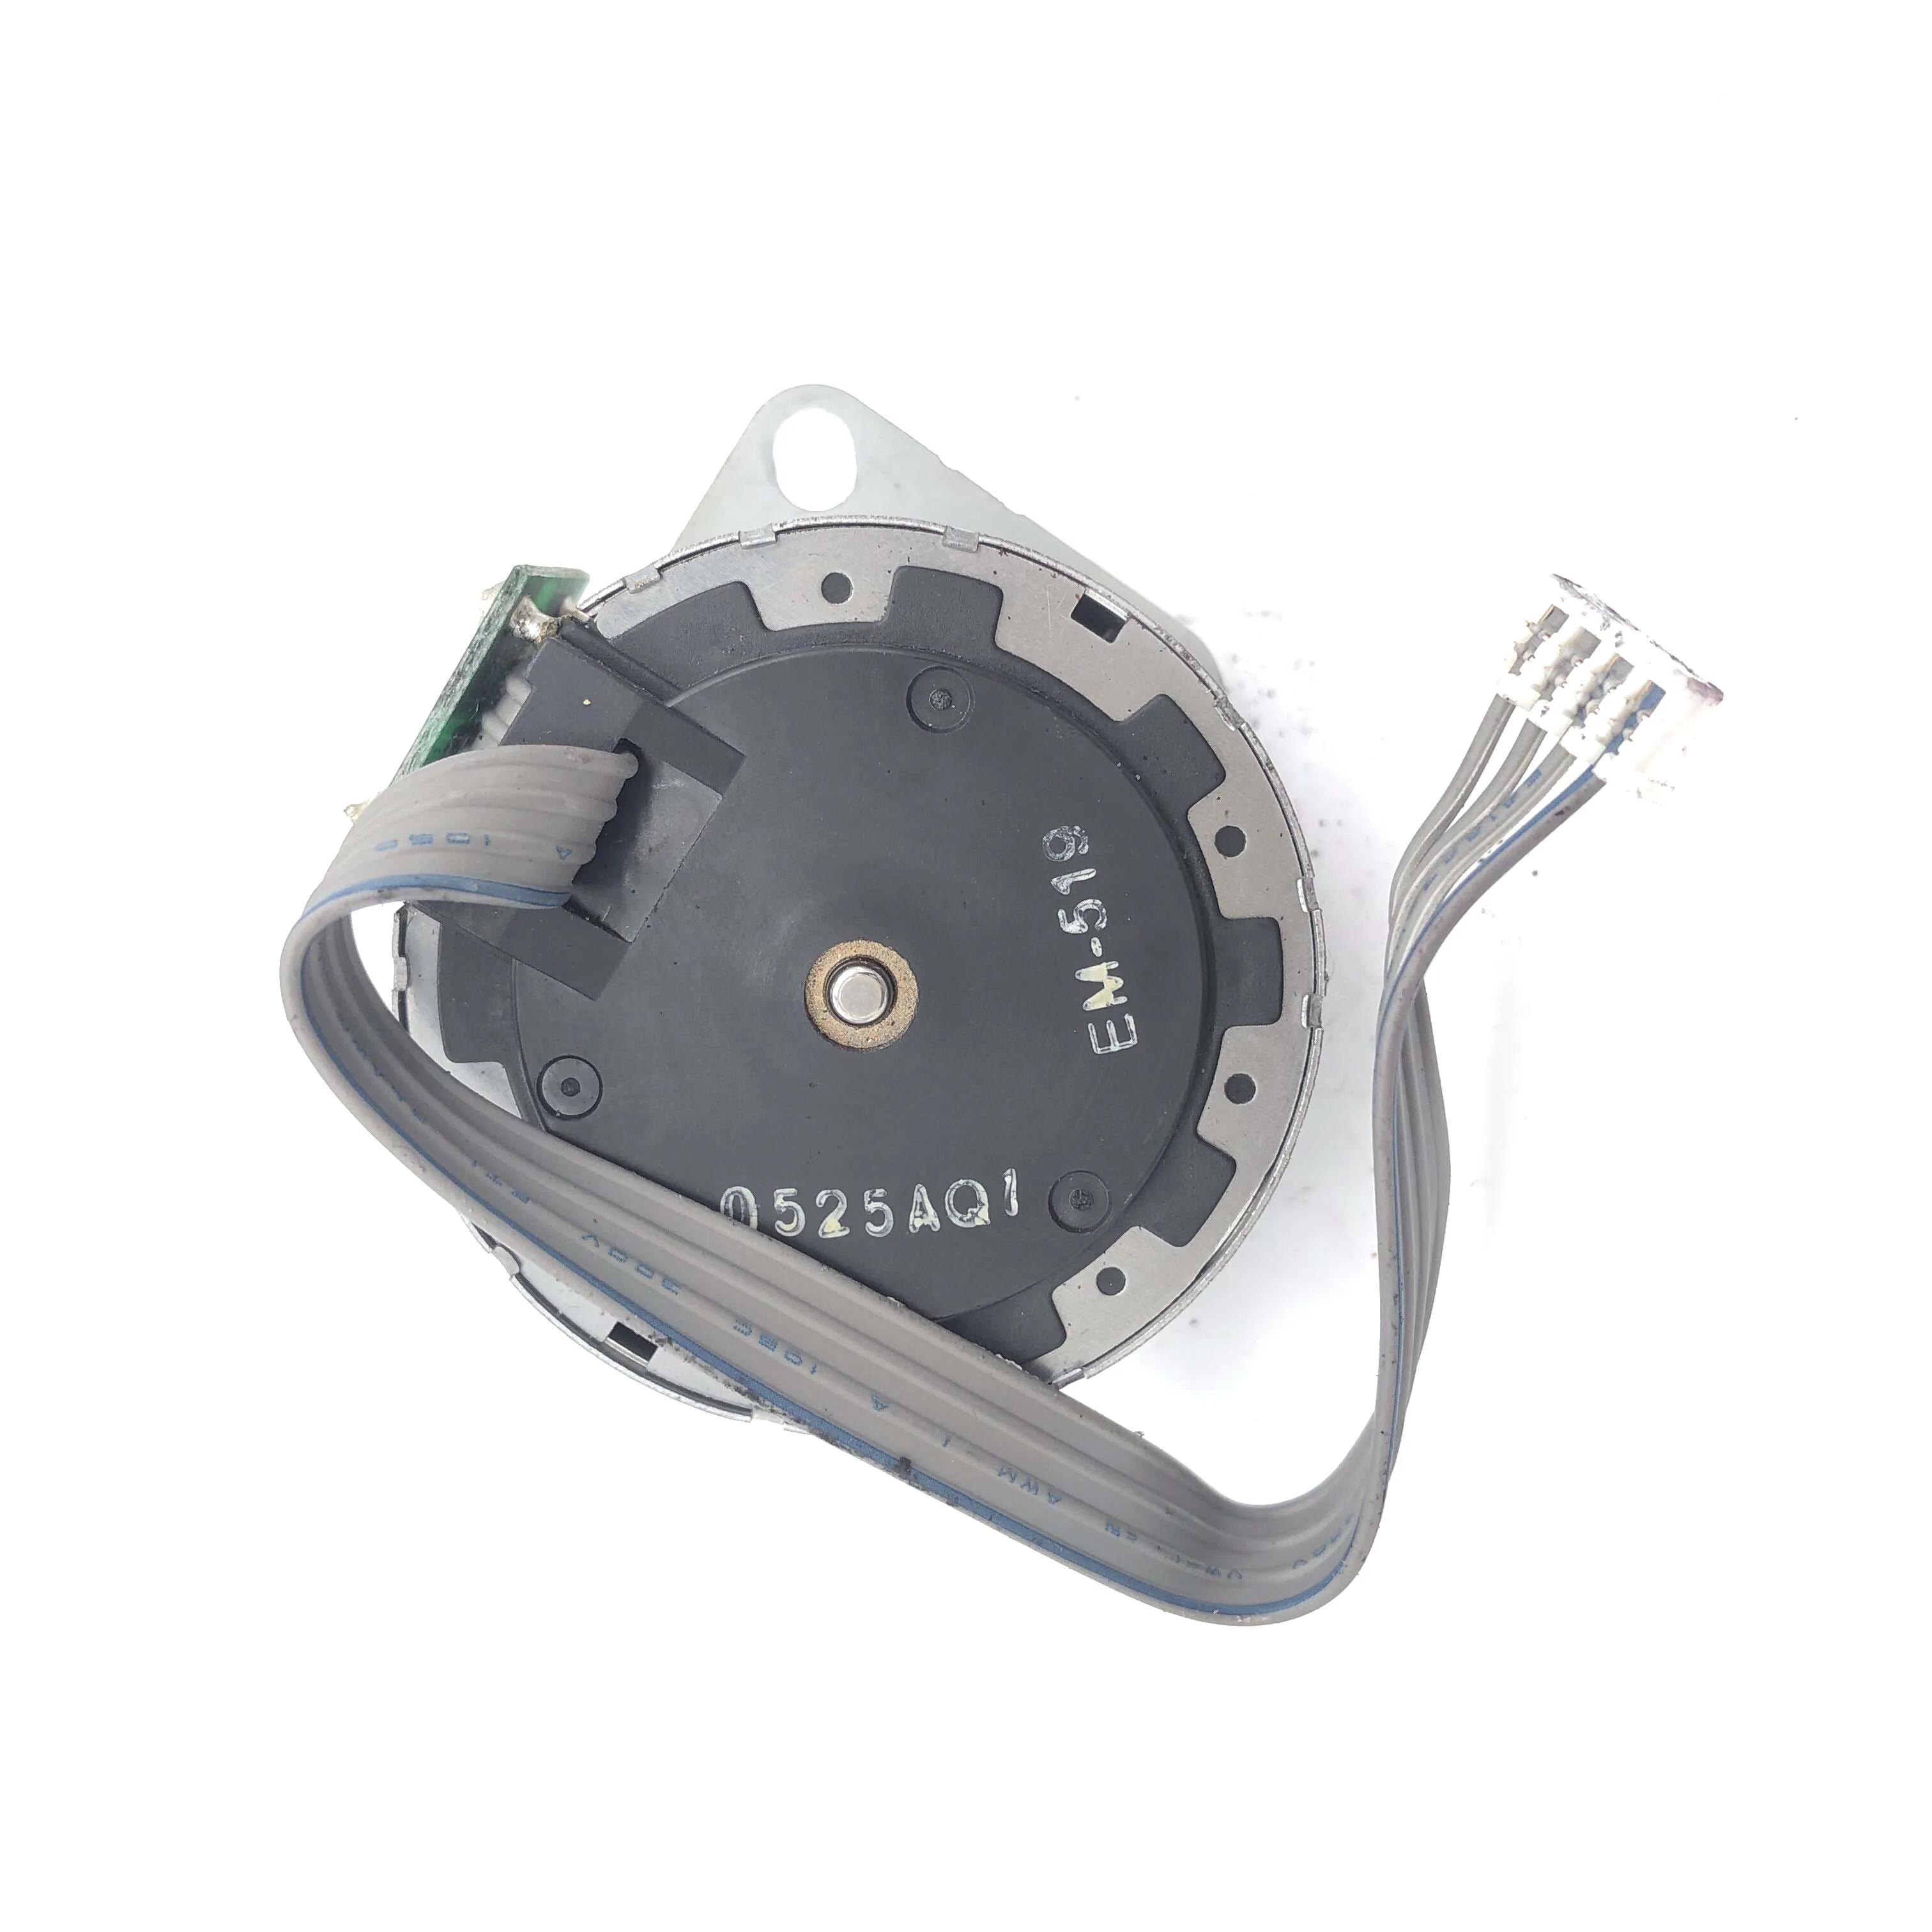 

Paper feed motor 3890 EM-519 0525AQ1 fits for Epson pro3890 P600 3885 P800 3800 3880 3850